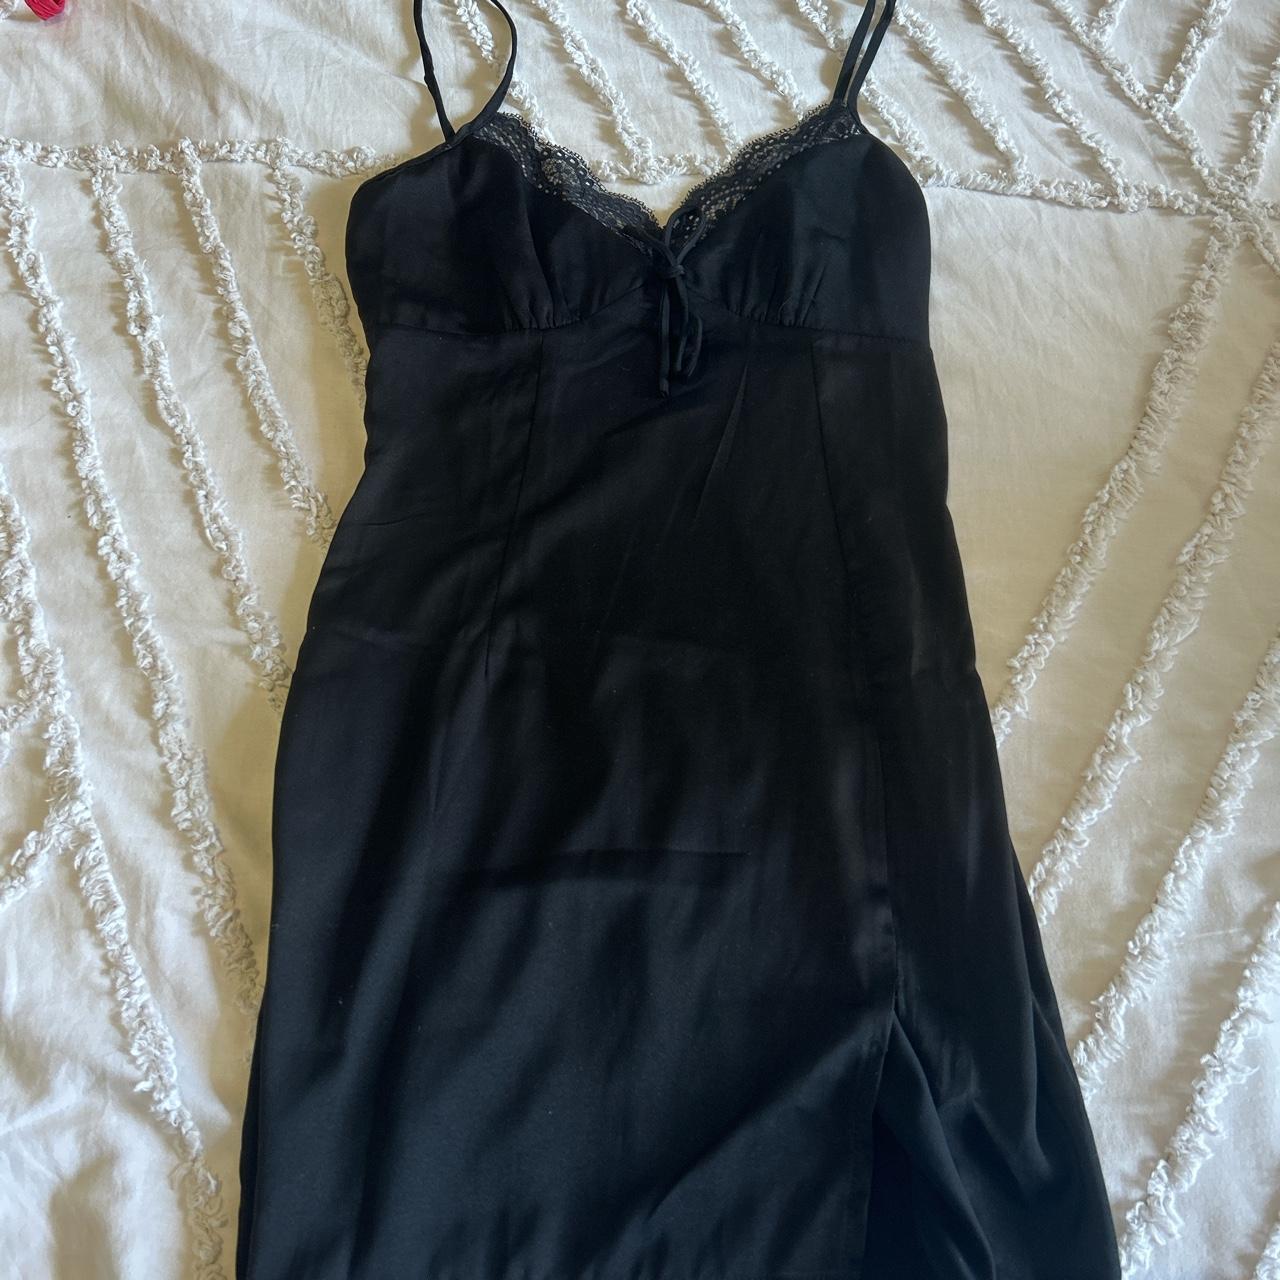 Very cute Princess Polly black dress with lace... - Depop